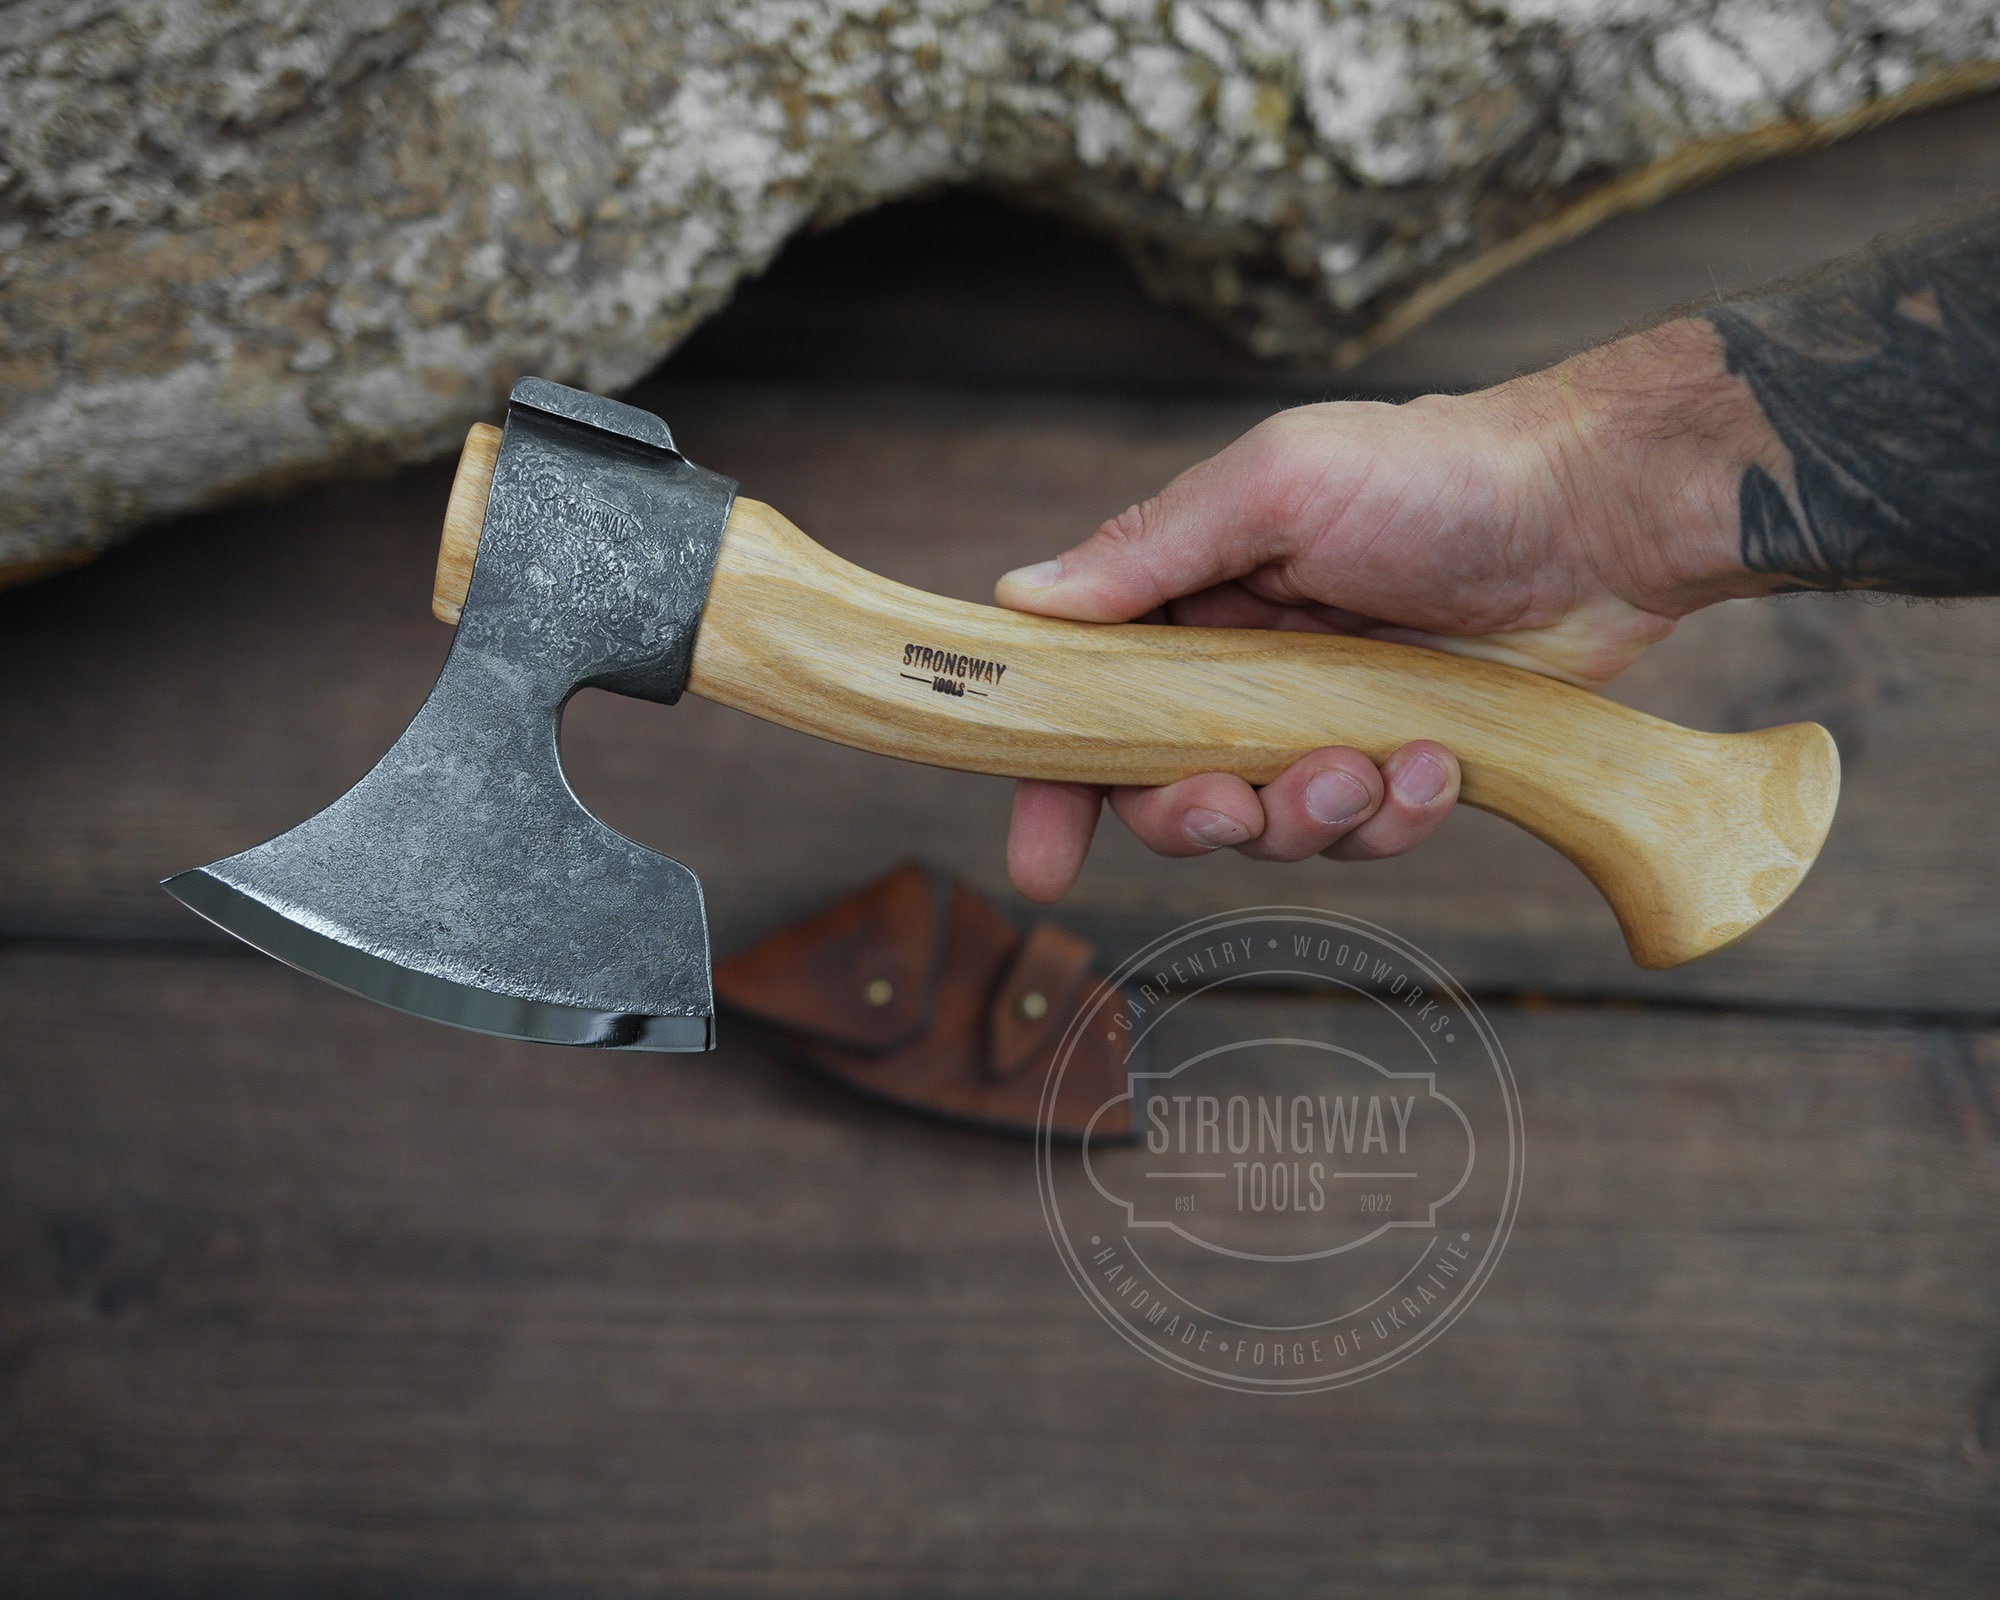 GARNY Carving Axe, Spoon Carving Axe, Carving Tool, Carving Axe, Hand  Forged, Woodworking Tool, Tools, Bushcraft, Woodcarving 